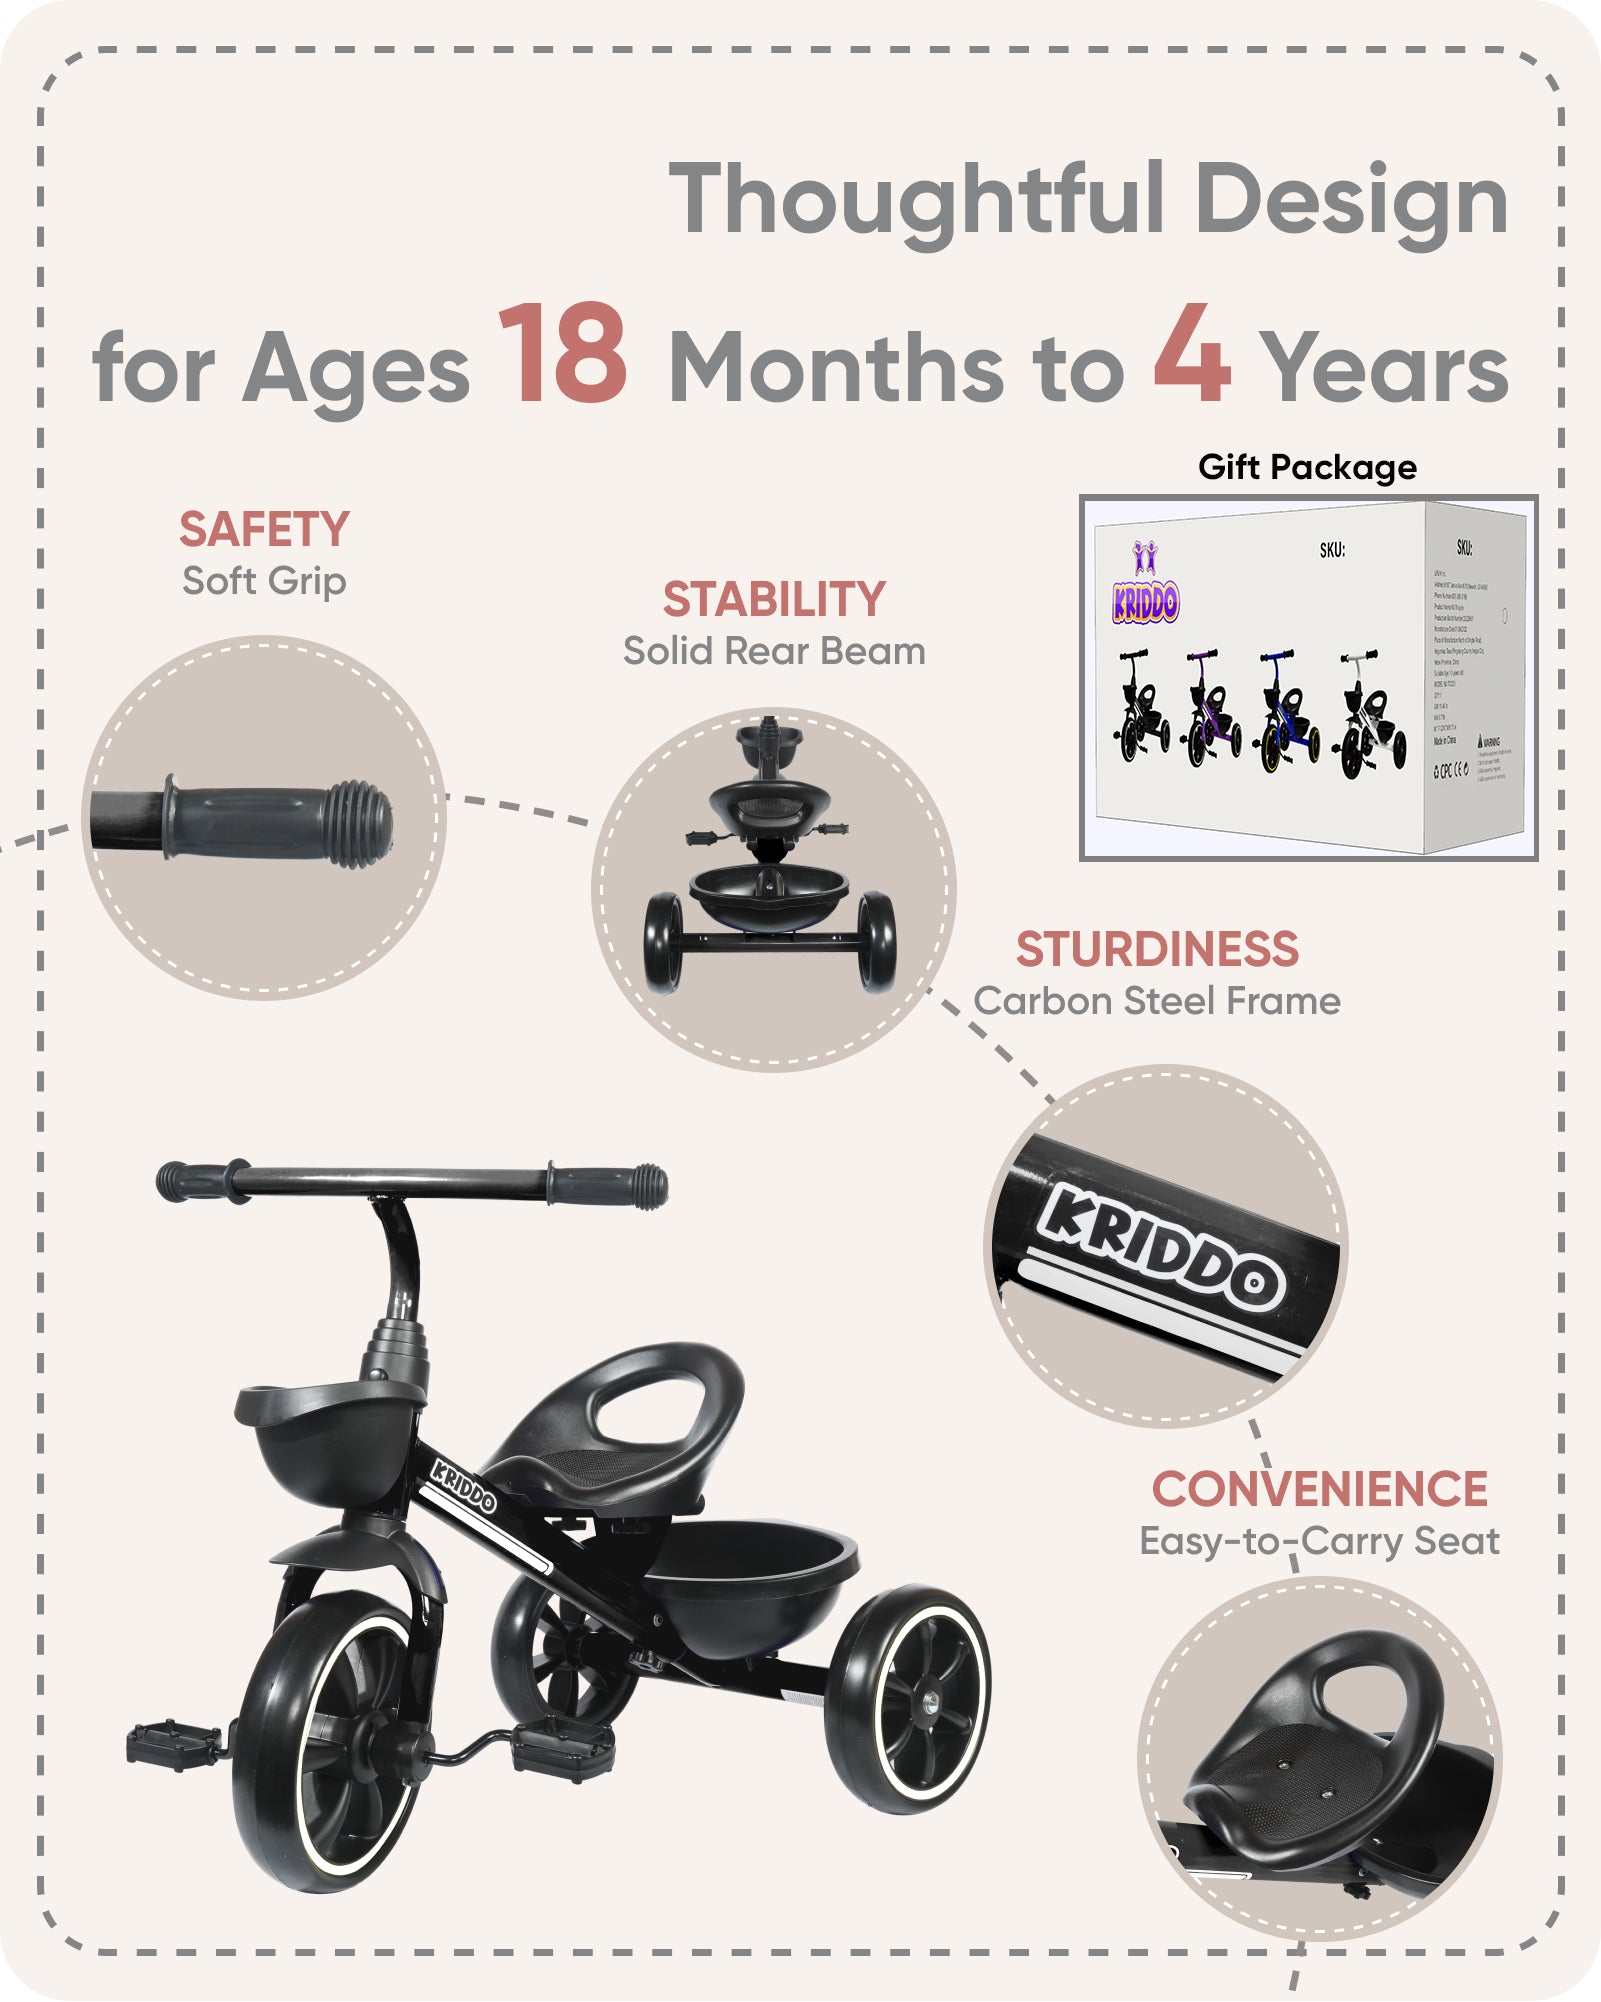 KRIDDO Kids Tricycles for 2- 5 Years, Gift Toddler Tricycles for 2-5 Year Olds, Easy Assembly, Black